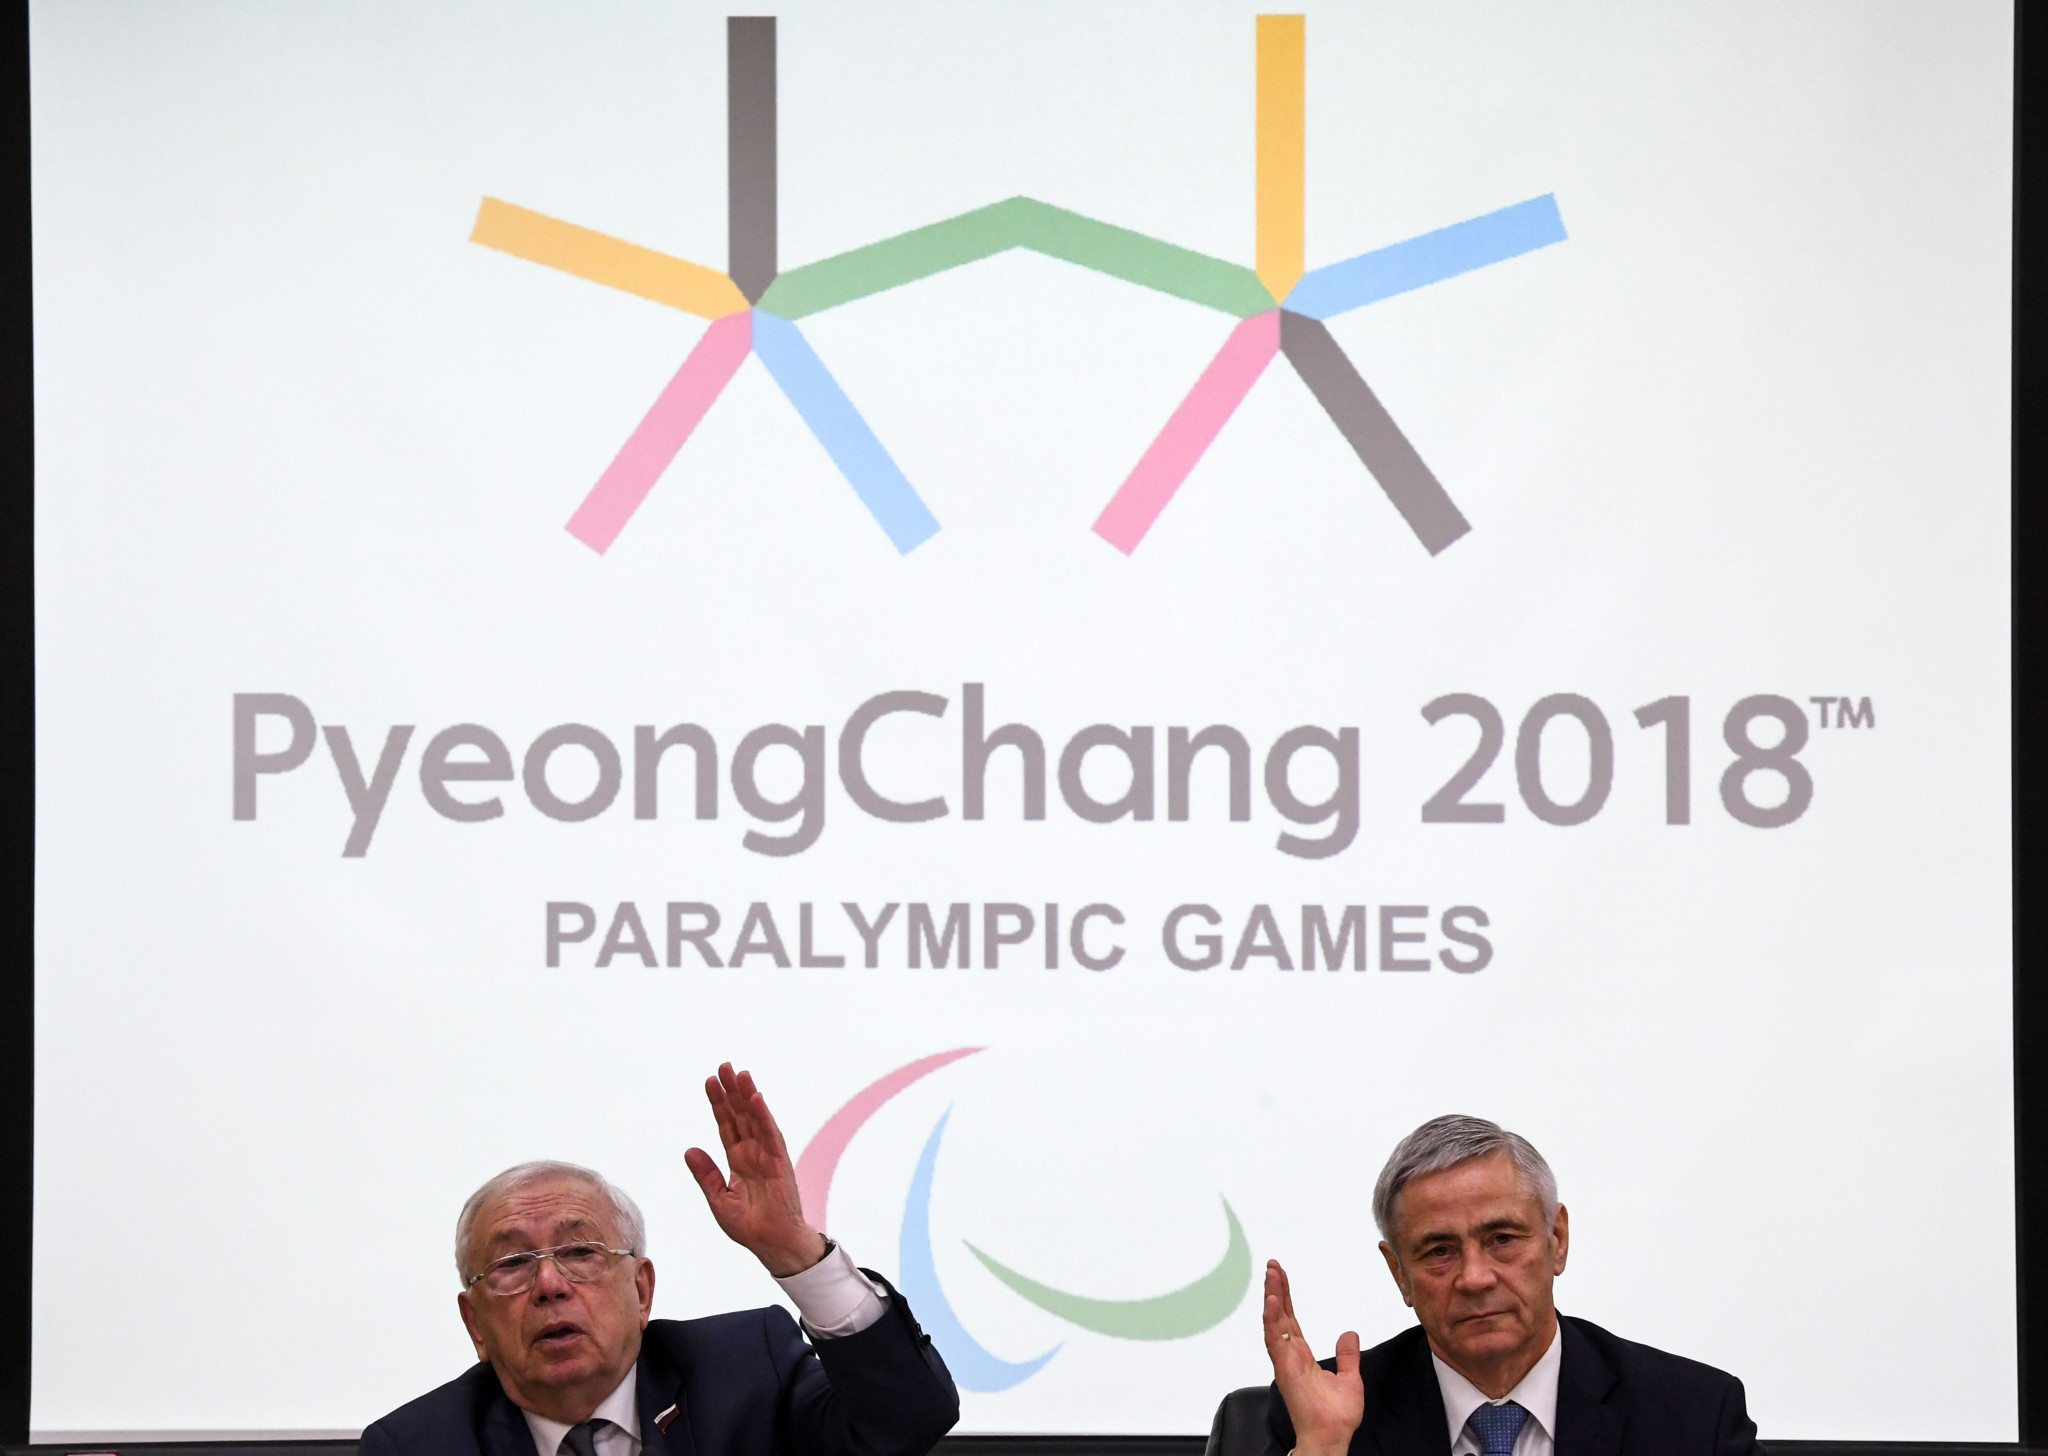 Pavel Rozhkov, right, has confirmed that the entire Russian Paralympic Committee delegation for Beijing 2022 is vaccinated against COVID-19 ©Getty Images